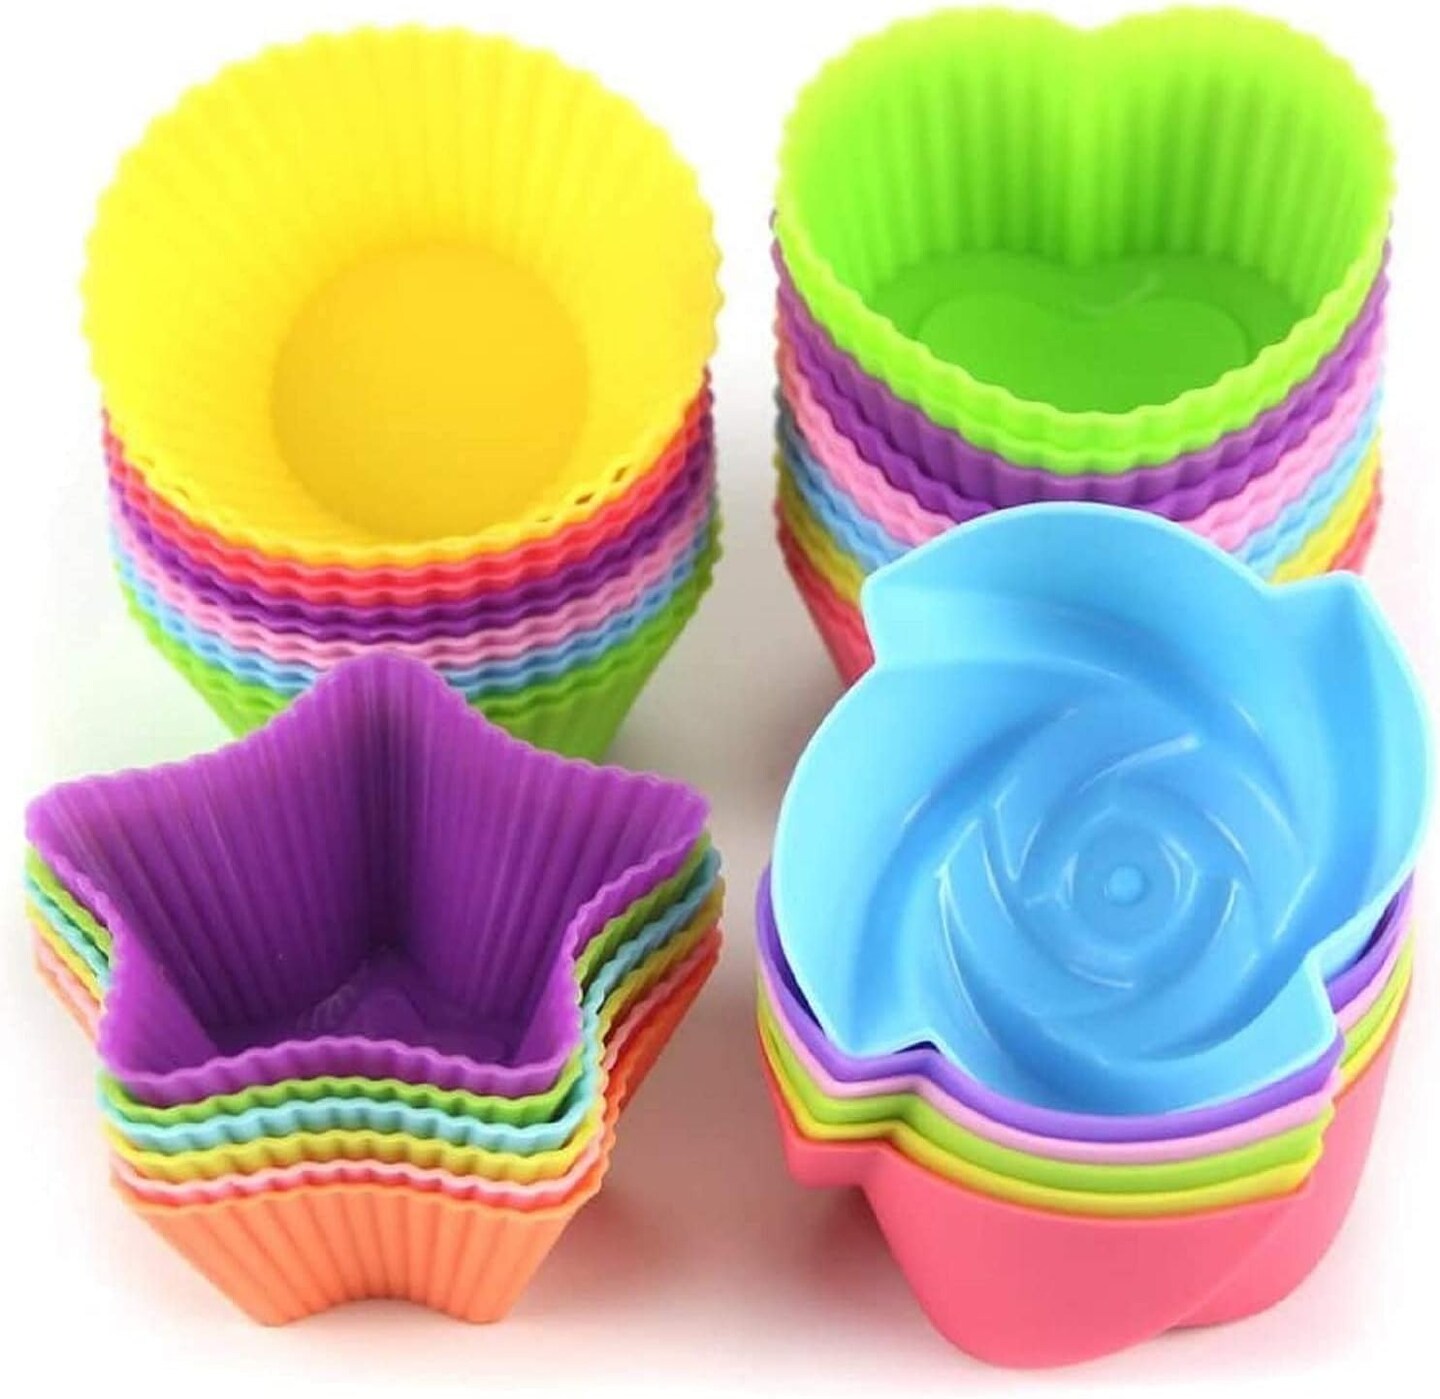 4 Shapes Reusable Silicone Cupcake Liners 24 Pieces